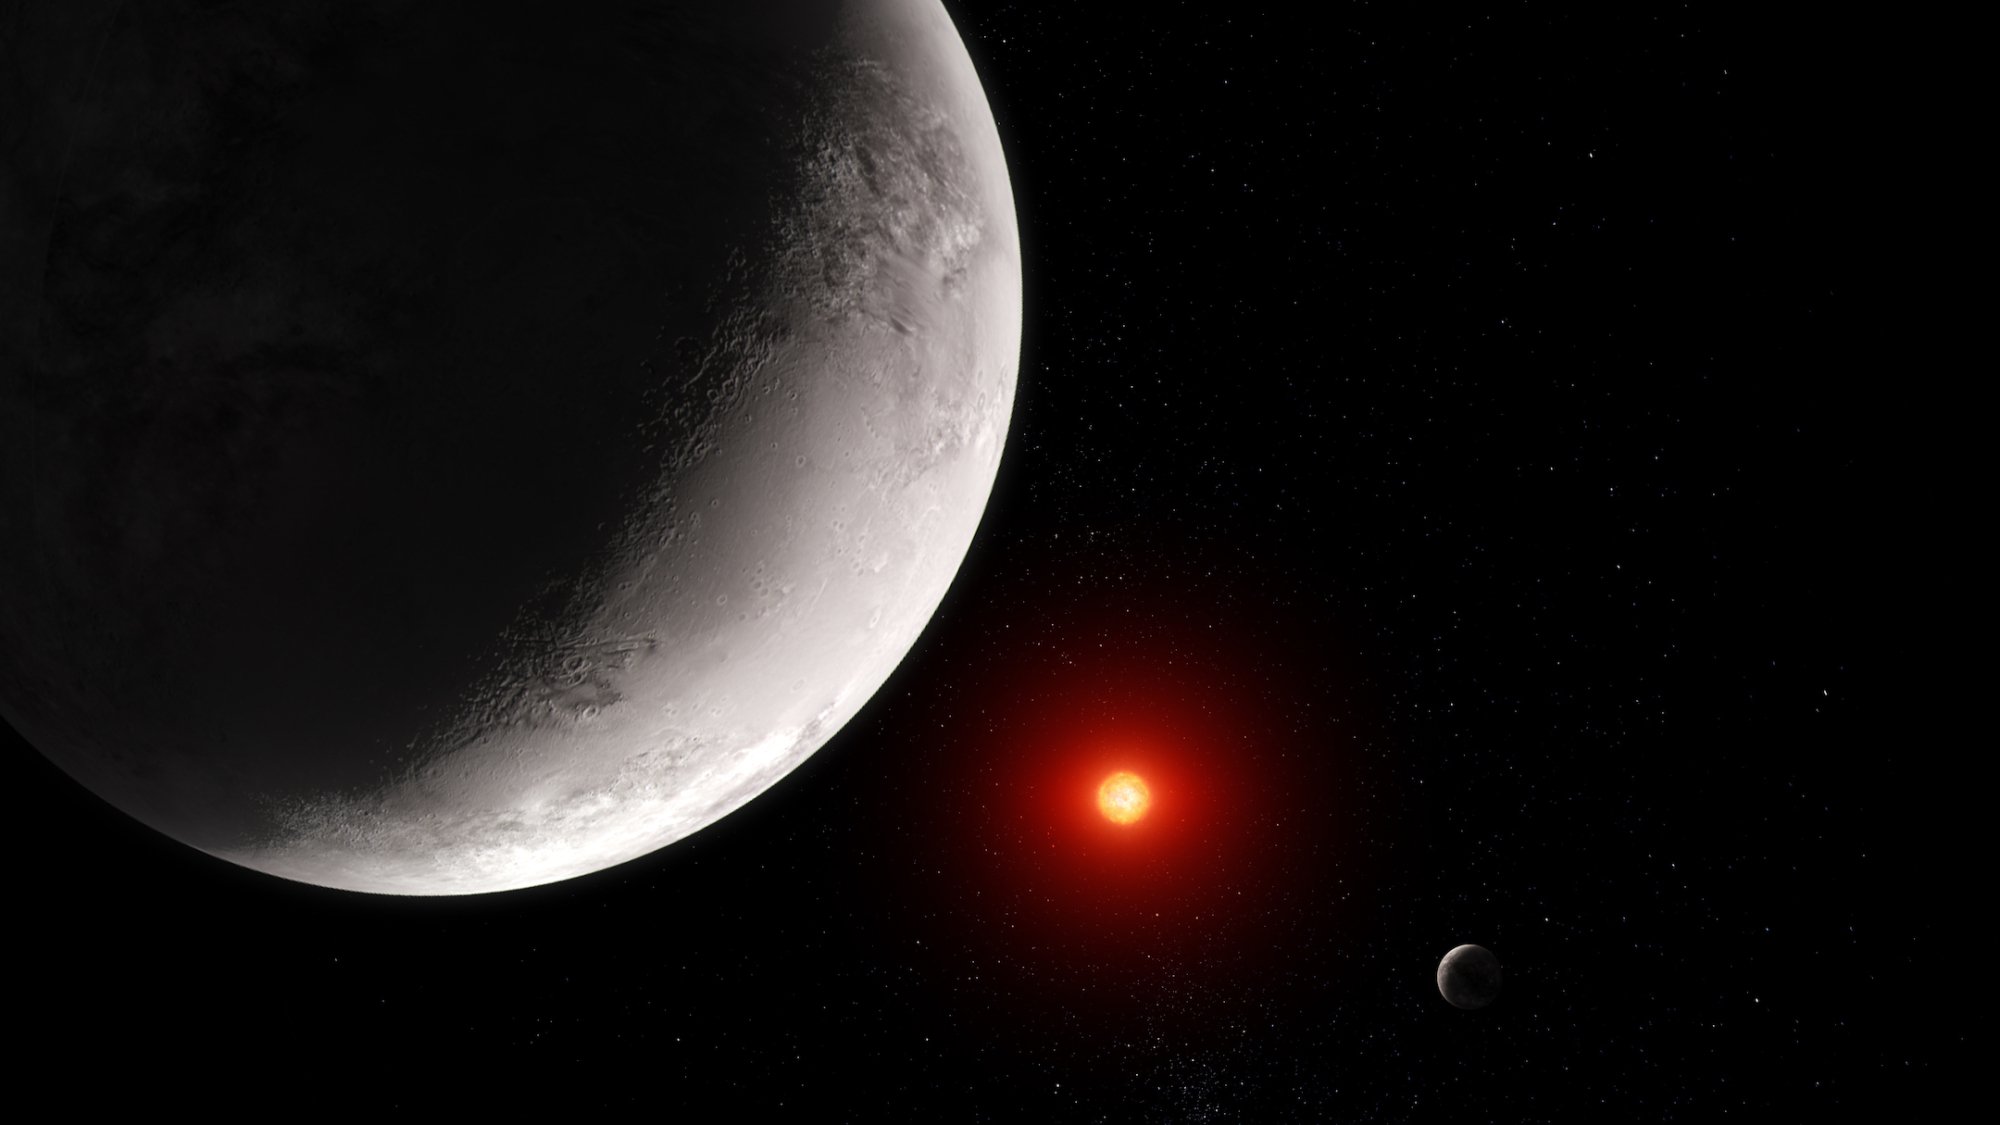 An artist's conception of the exoplanet TRAPPIST-1 c.